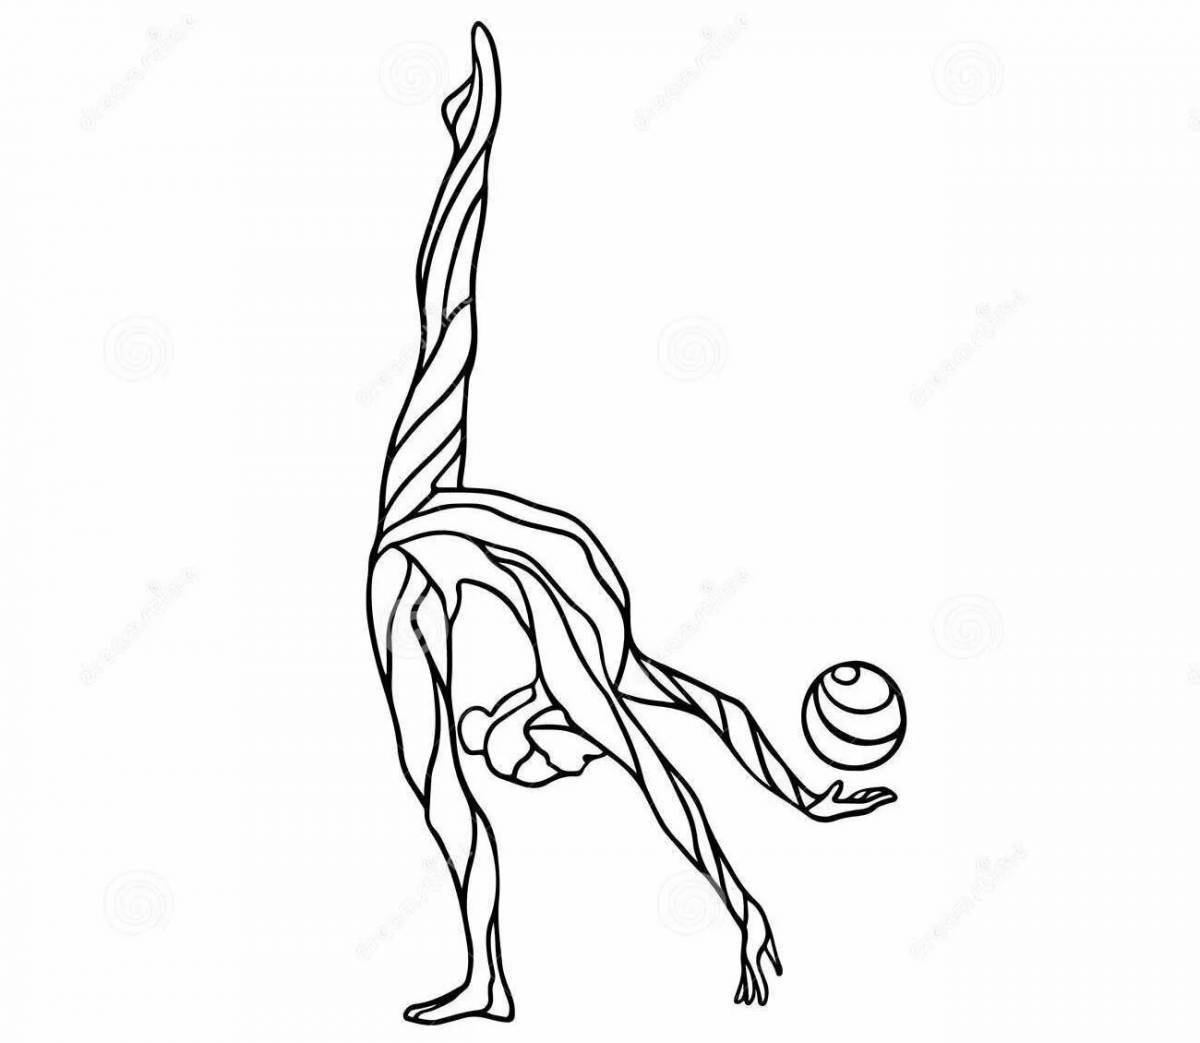 Coloring page spinning gymnast